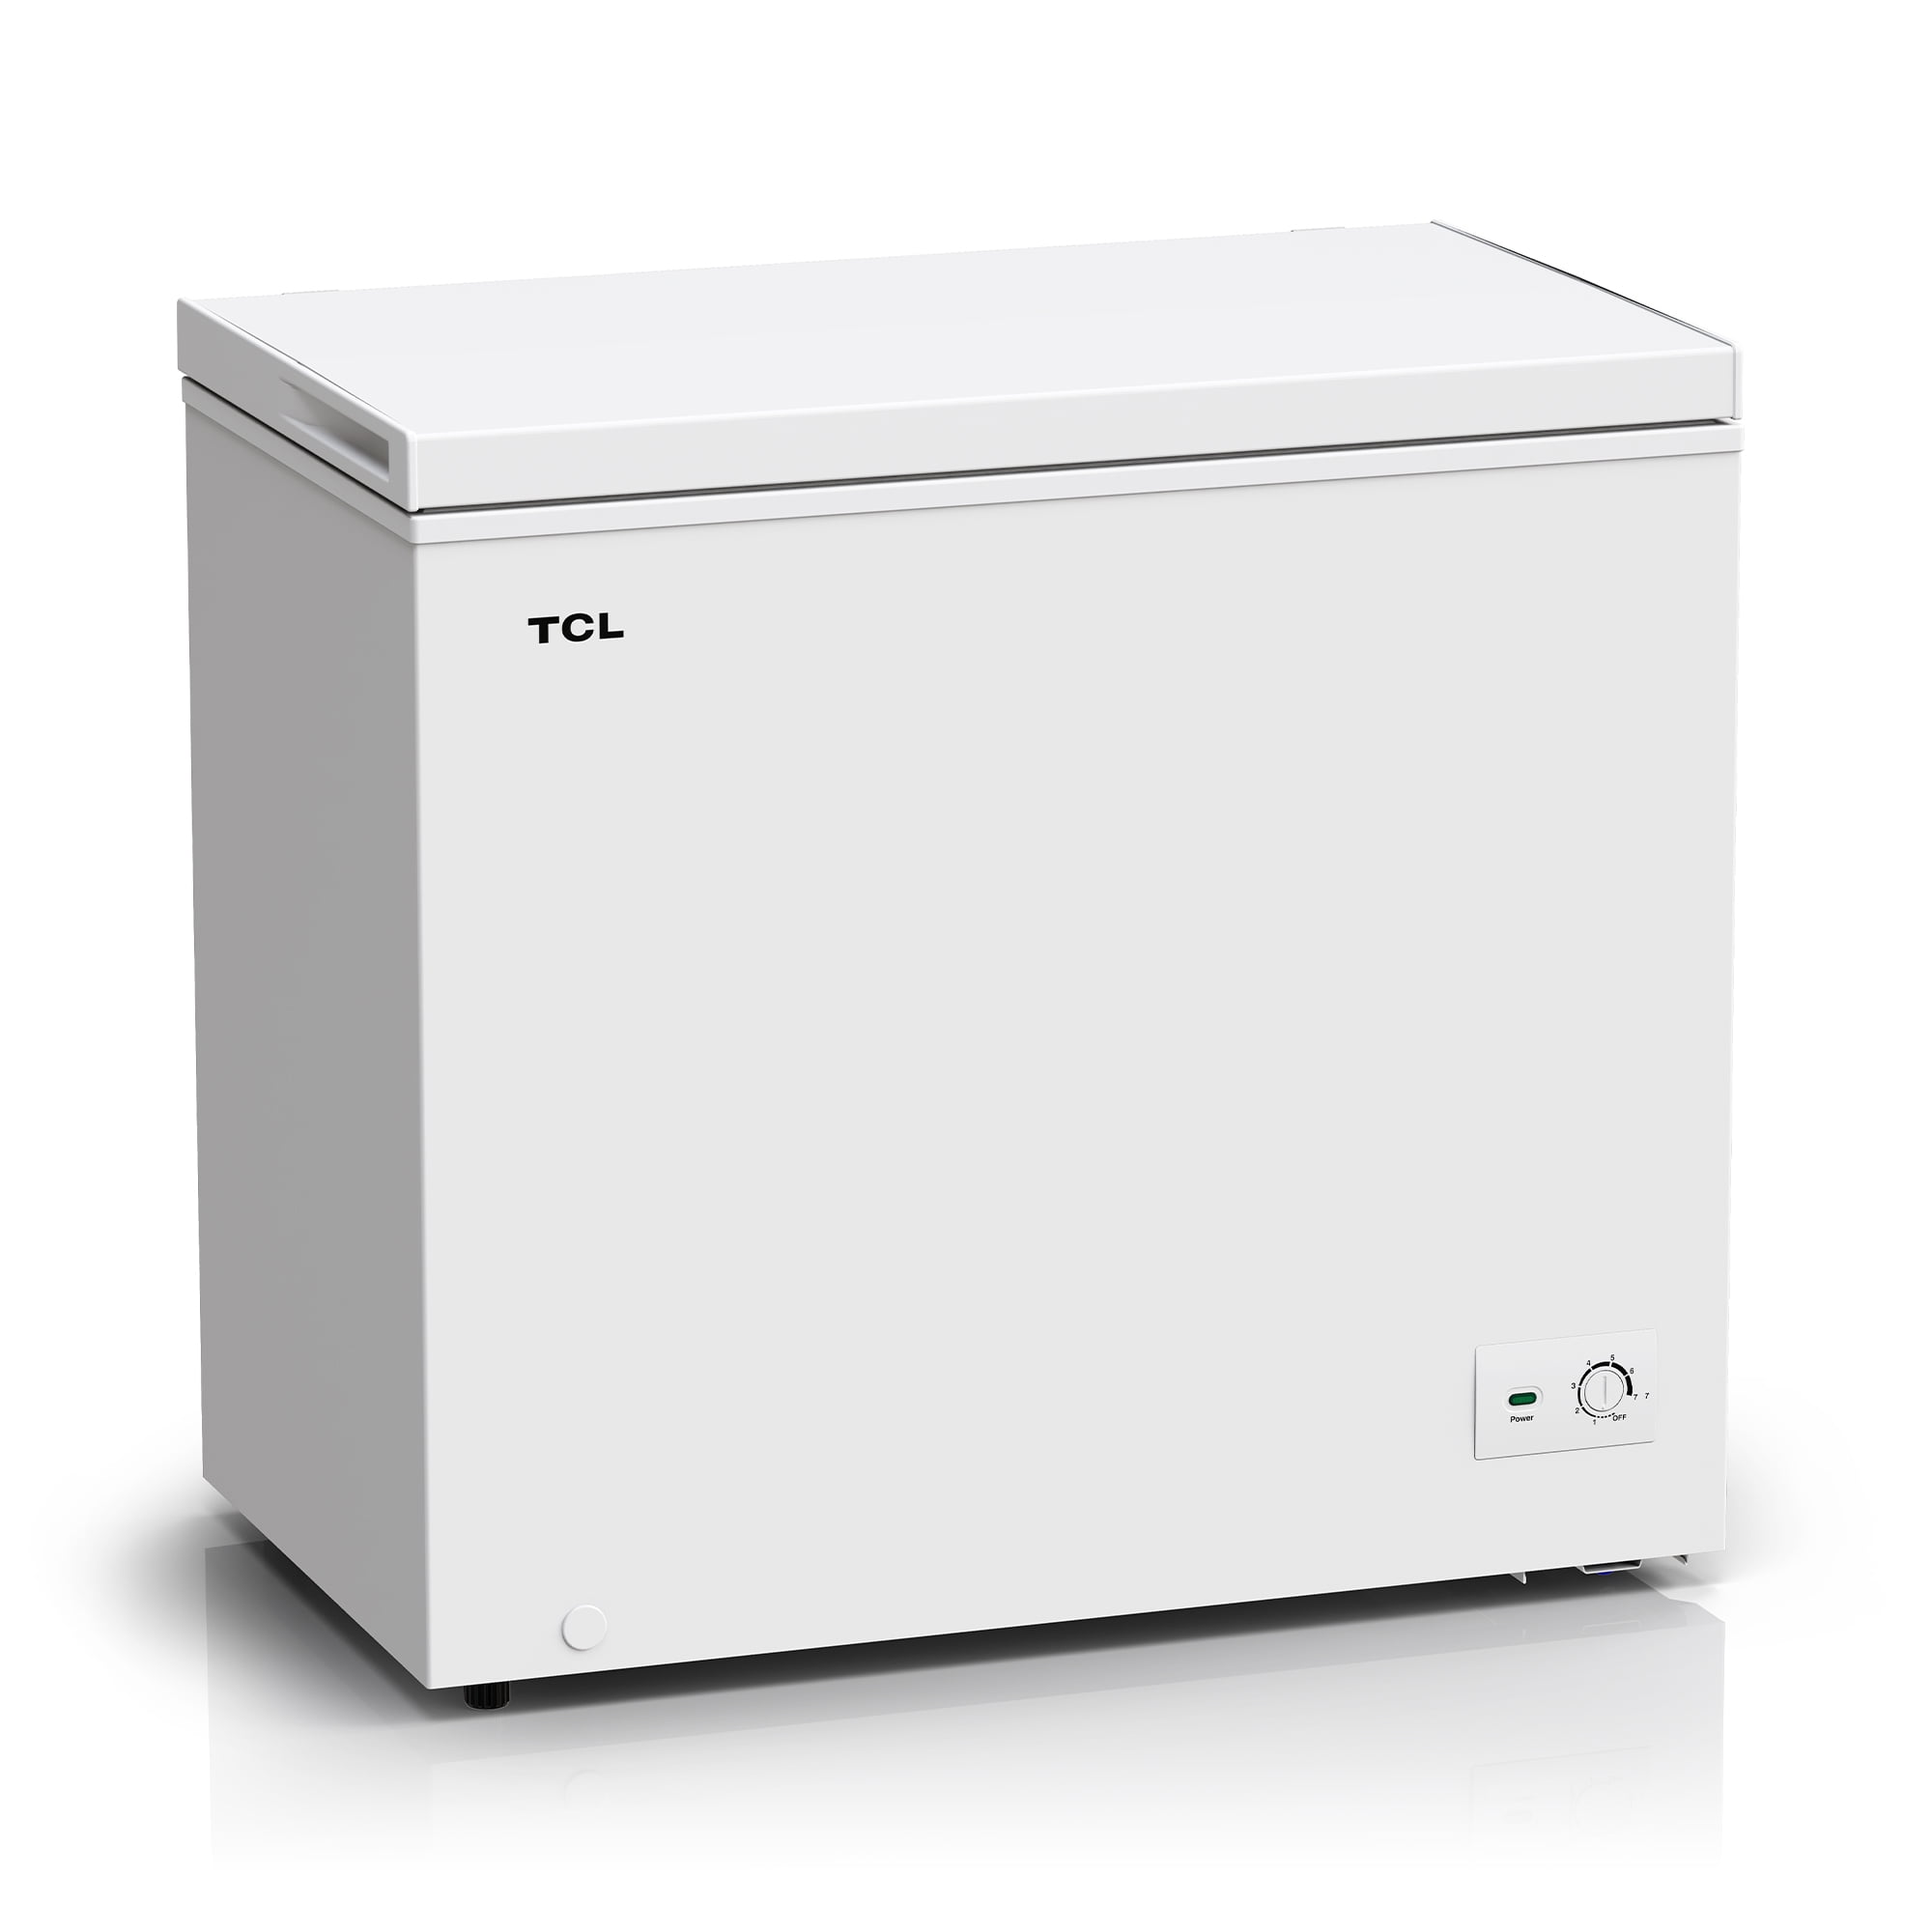 TCL CF073W, White 7.0 Cu. Ft. Chest Freezer $165.00 + Free Shipping